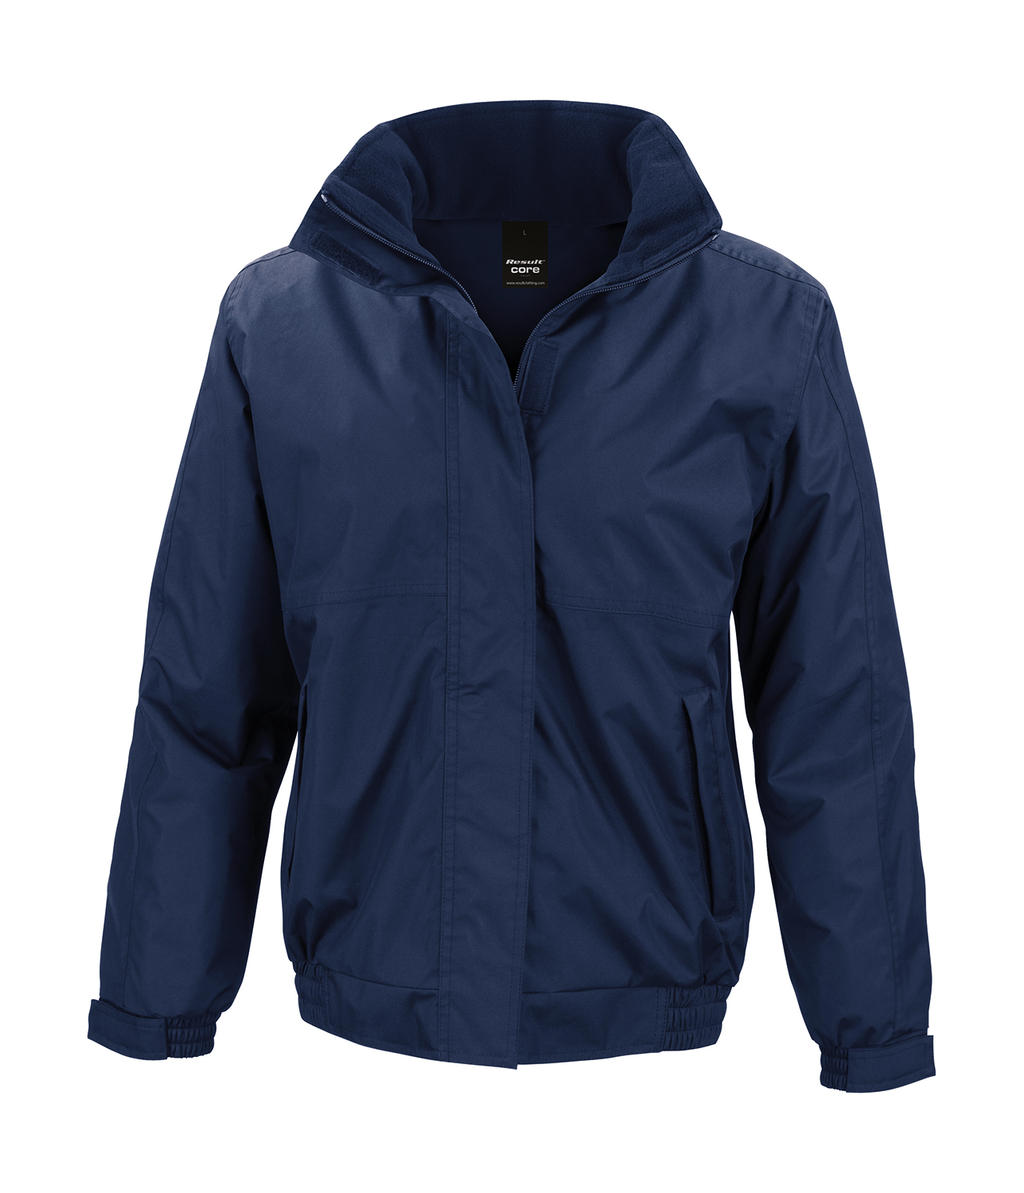  Ladies Channel Jacket in Farbe Navy